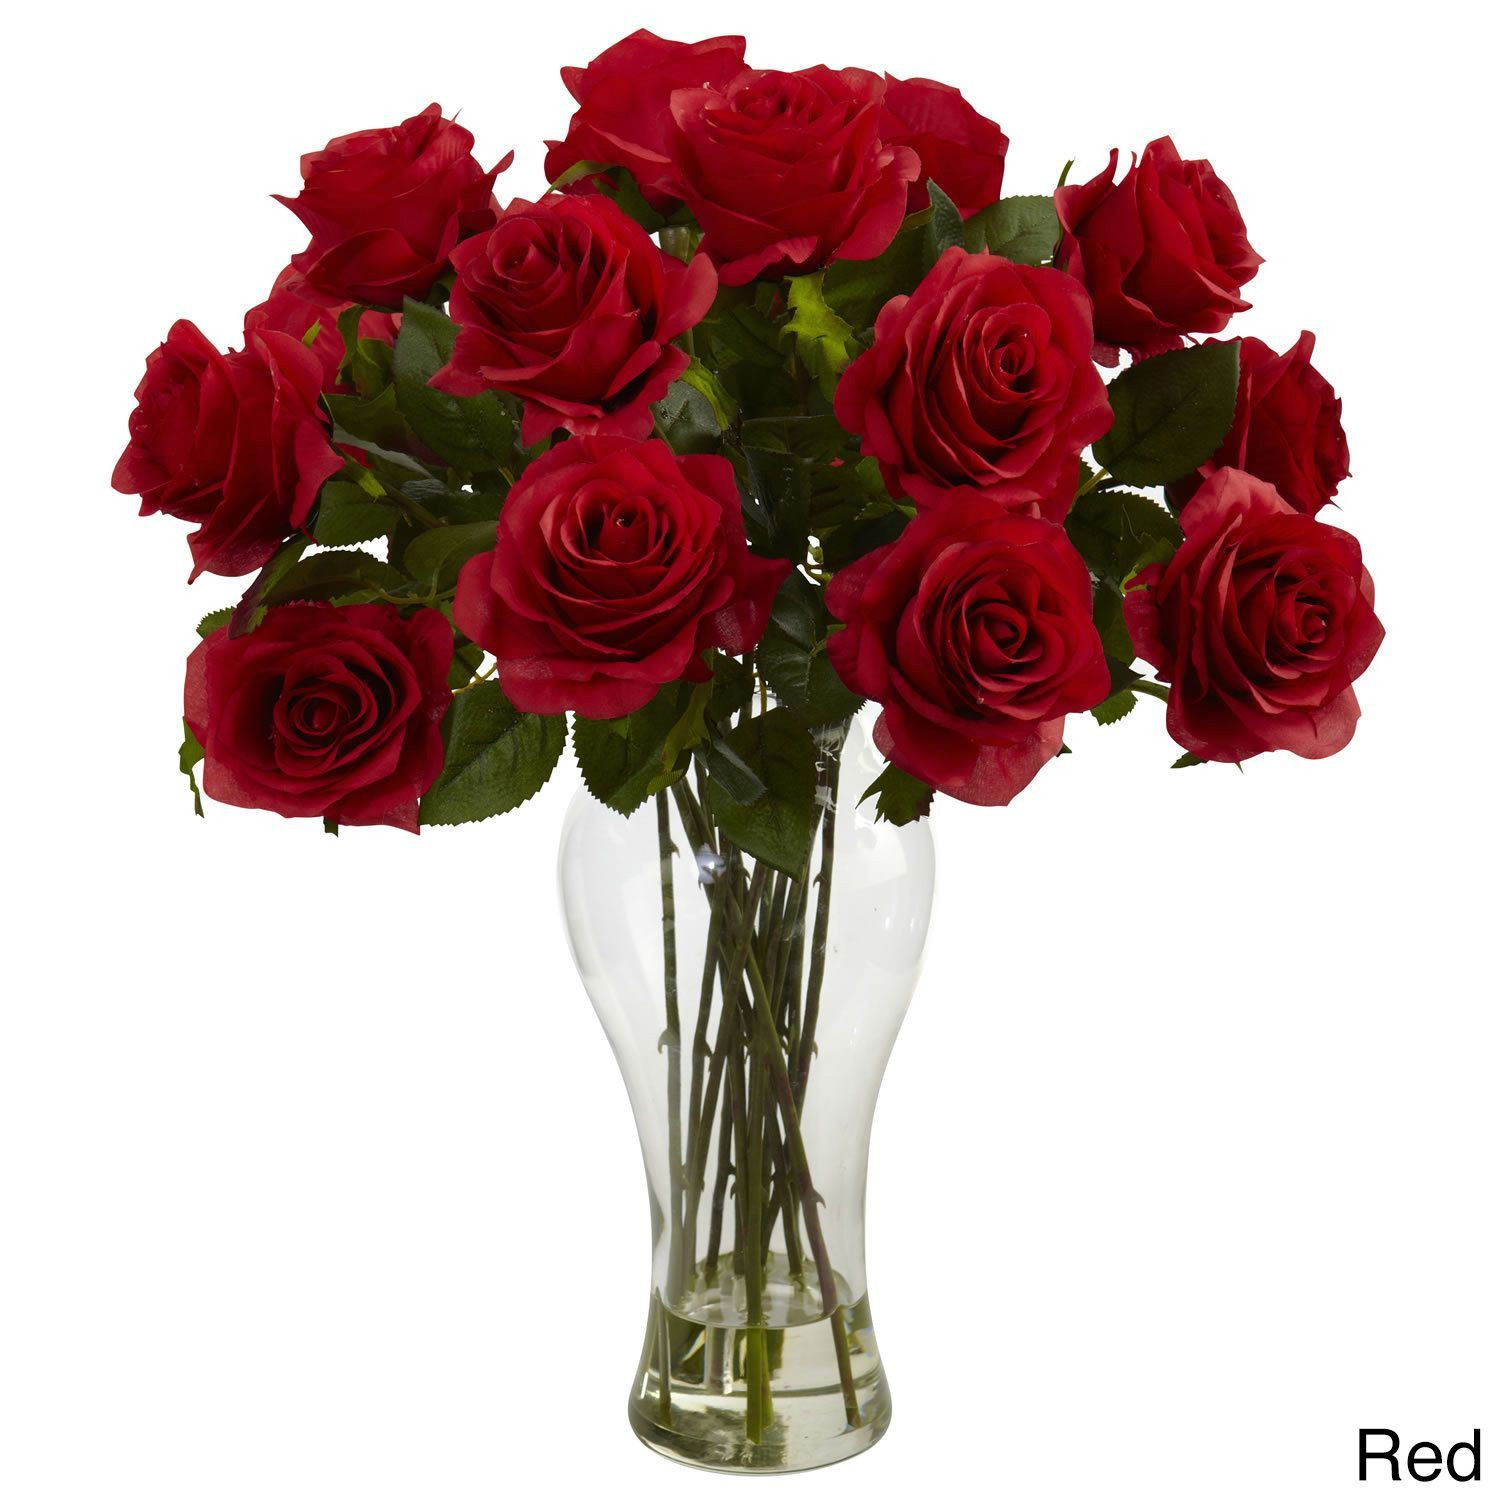 29 Cute Roses with Vase 2024 free download roses with vase of nearly natural blooming roses vase blooming roses w vase red with regard to nearly natural blooming roses vase blooming roses w vase red plastic